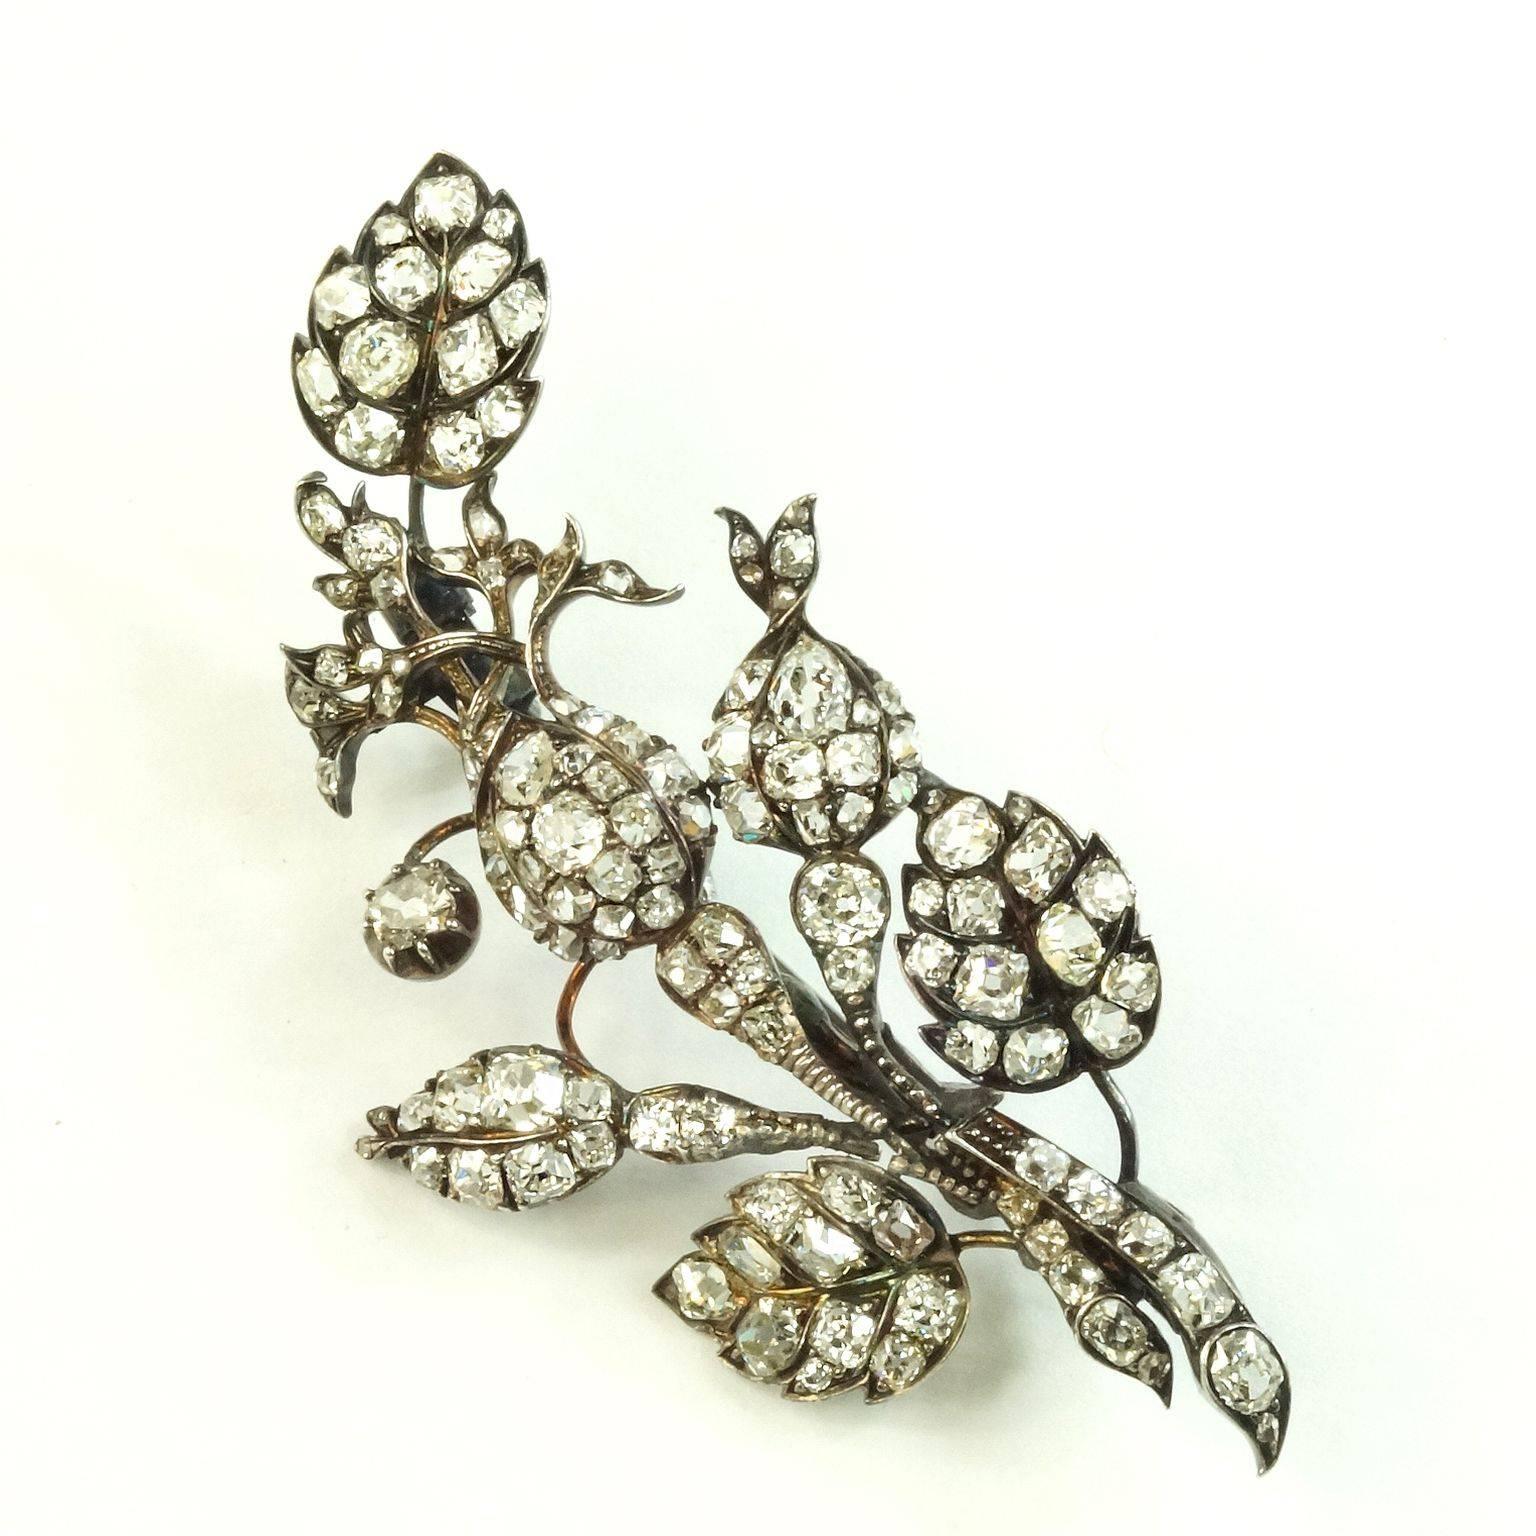 Victorian diamond flower spray brooch silver front with yellow gold
back. So beautiful!
Approximately 11.00 ct. Rose cut diamonds
Measures 2 3/4" (7 cm) in length and 2" (5.1 cm) in width at widest point.
Bring back the brooch!
